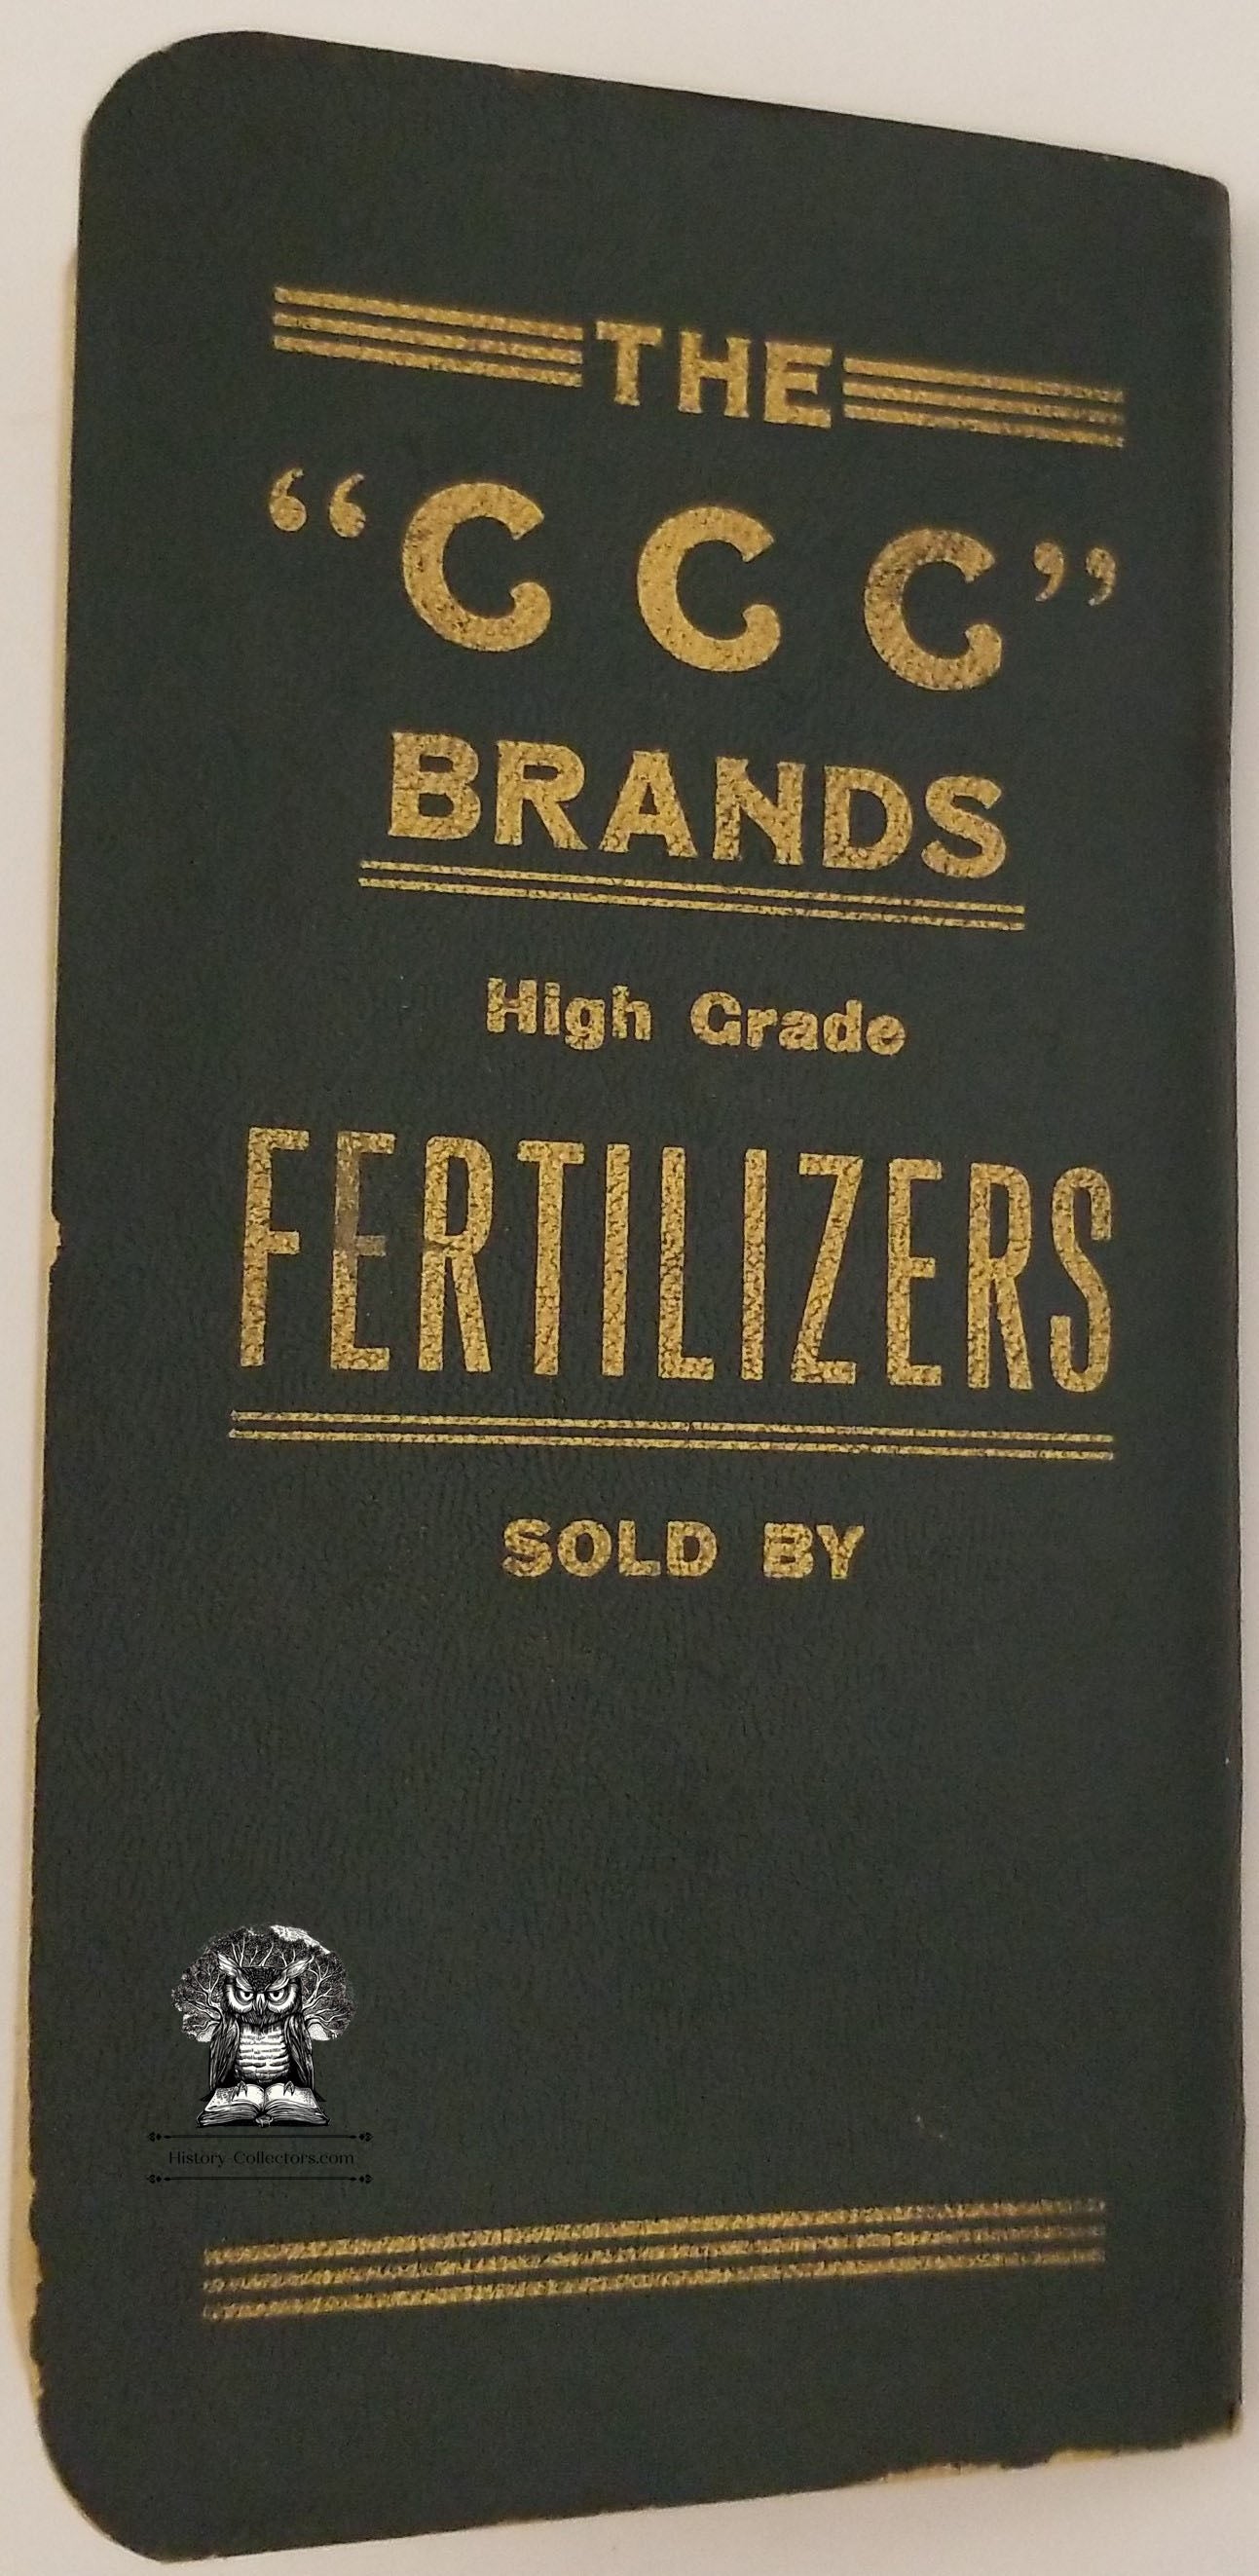 c1900 Central Chemical Company Advertising Booklet Fertilizers Hagerstown MD CCC